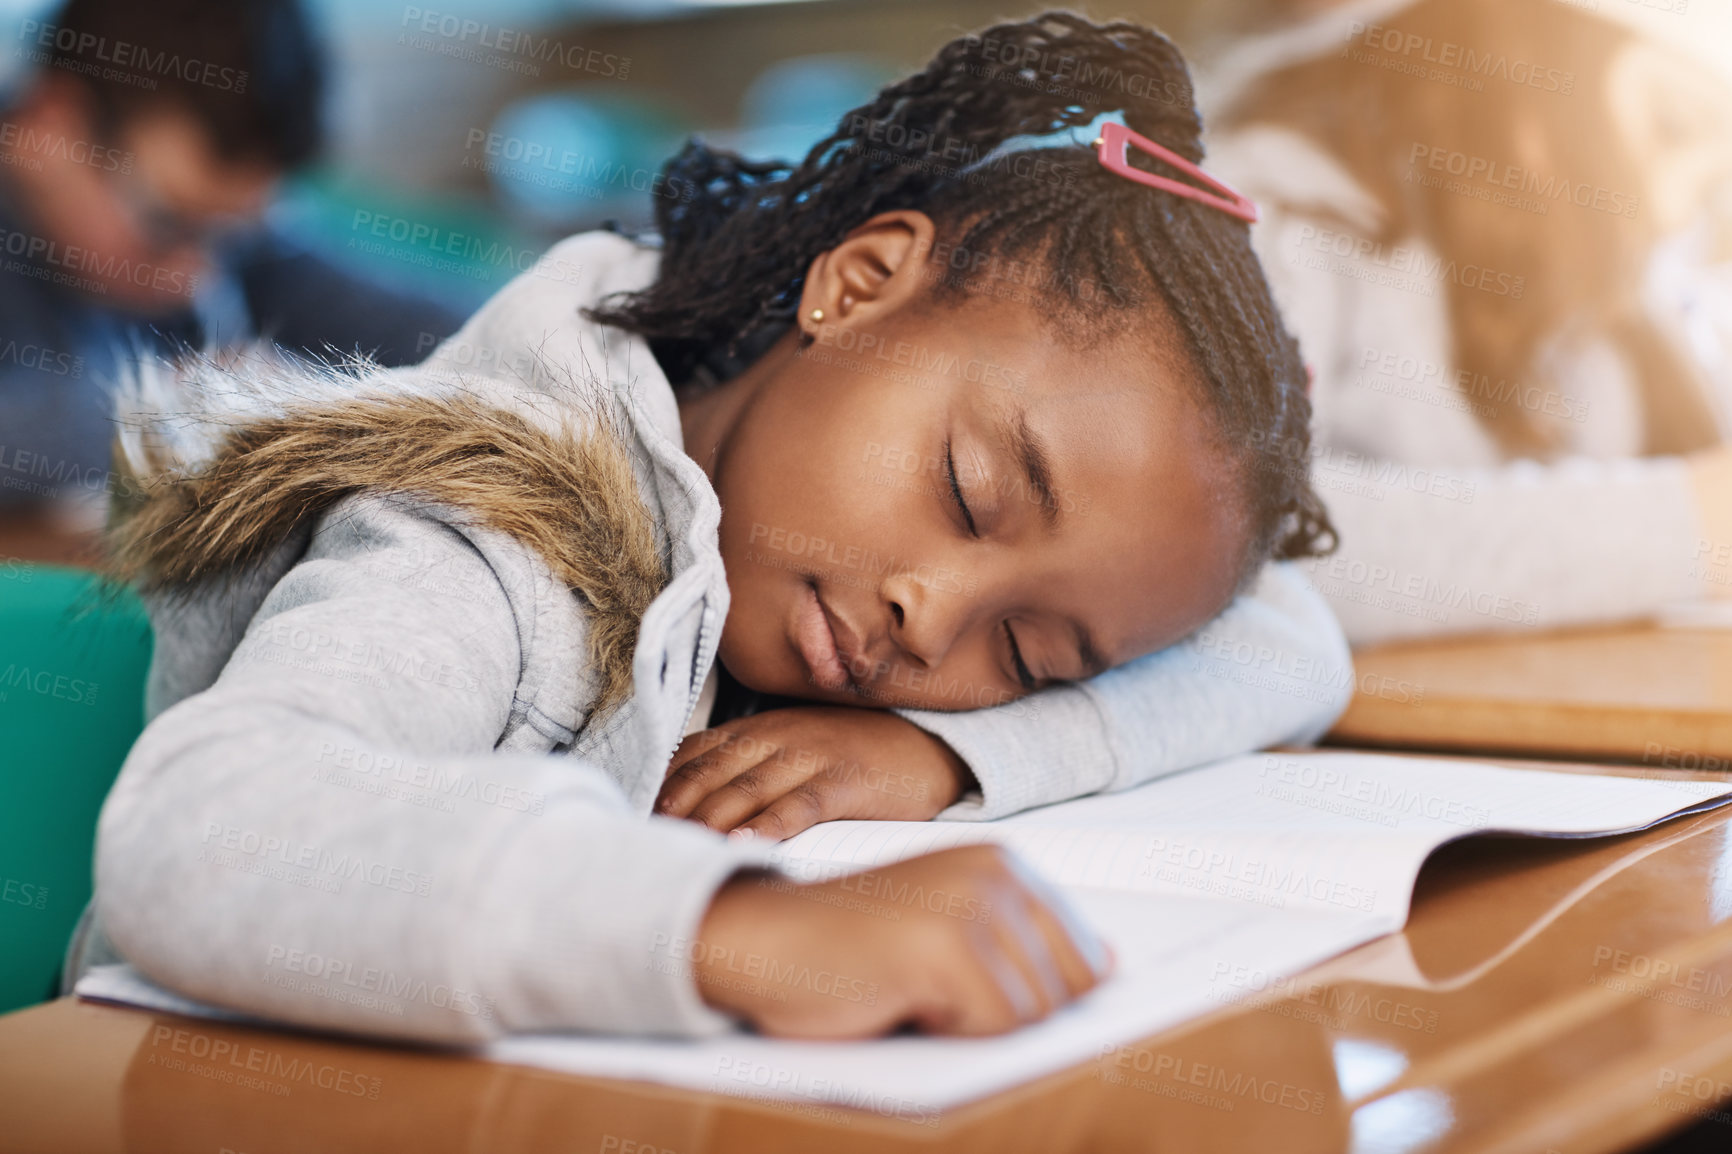 Buy stock photo Cropped shot of an elementary school girl taking a nap in the classroom